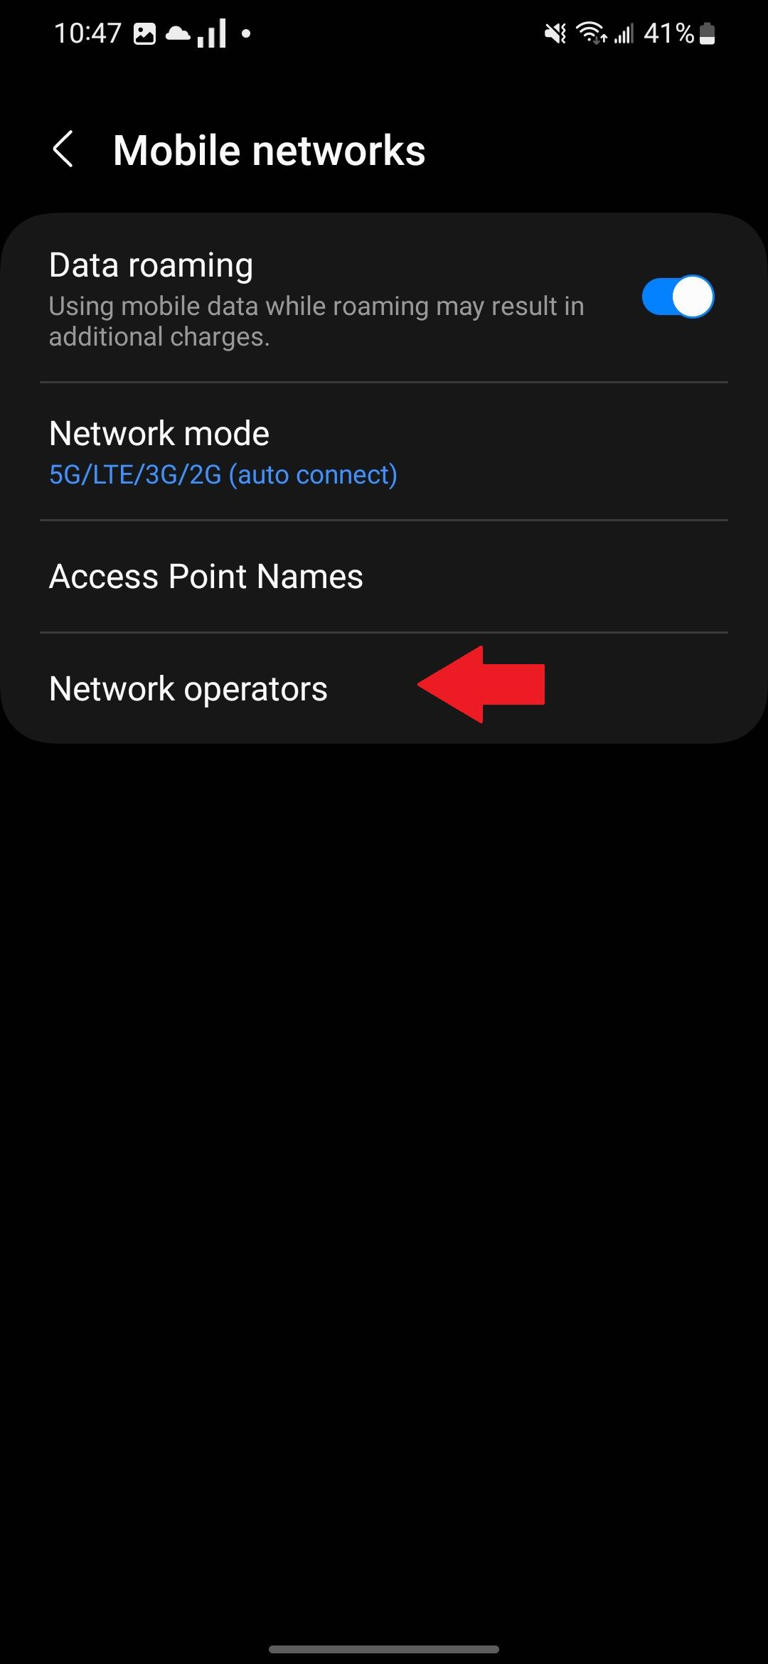 Mobile networks settings on a Samsung phone with a red arrow pointing to the Network operators option